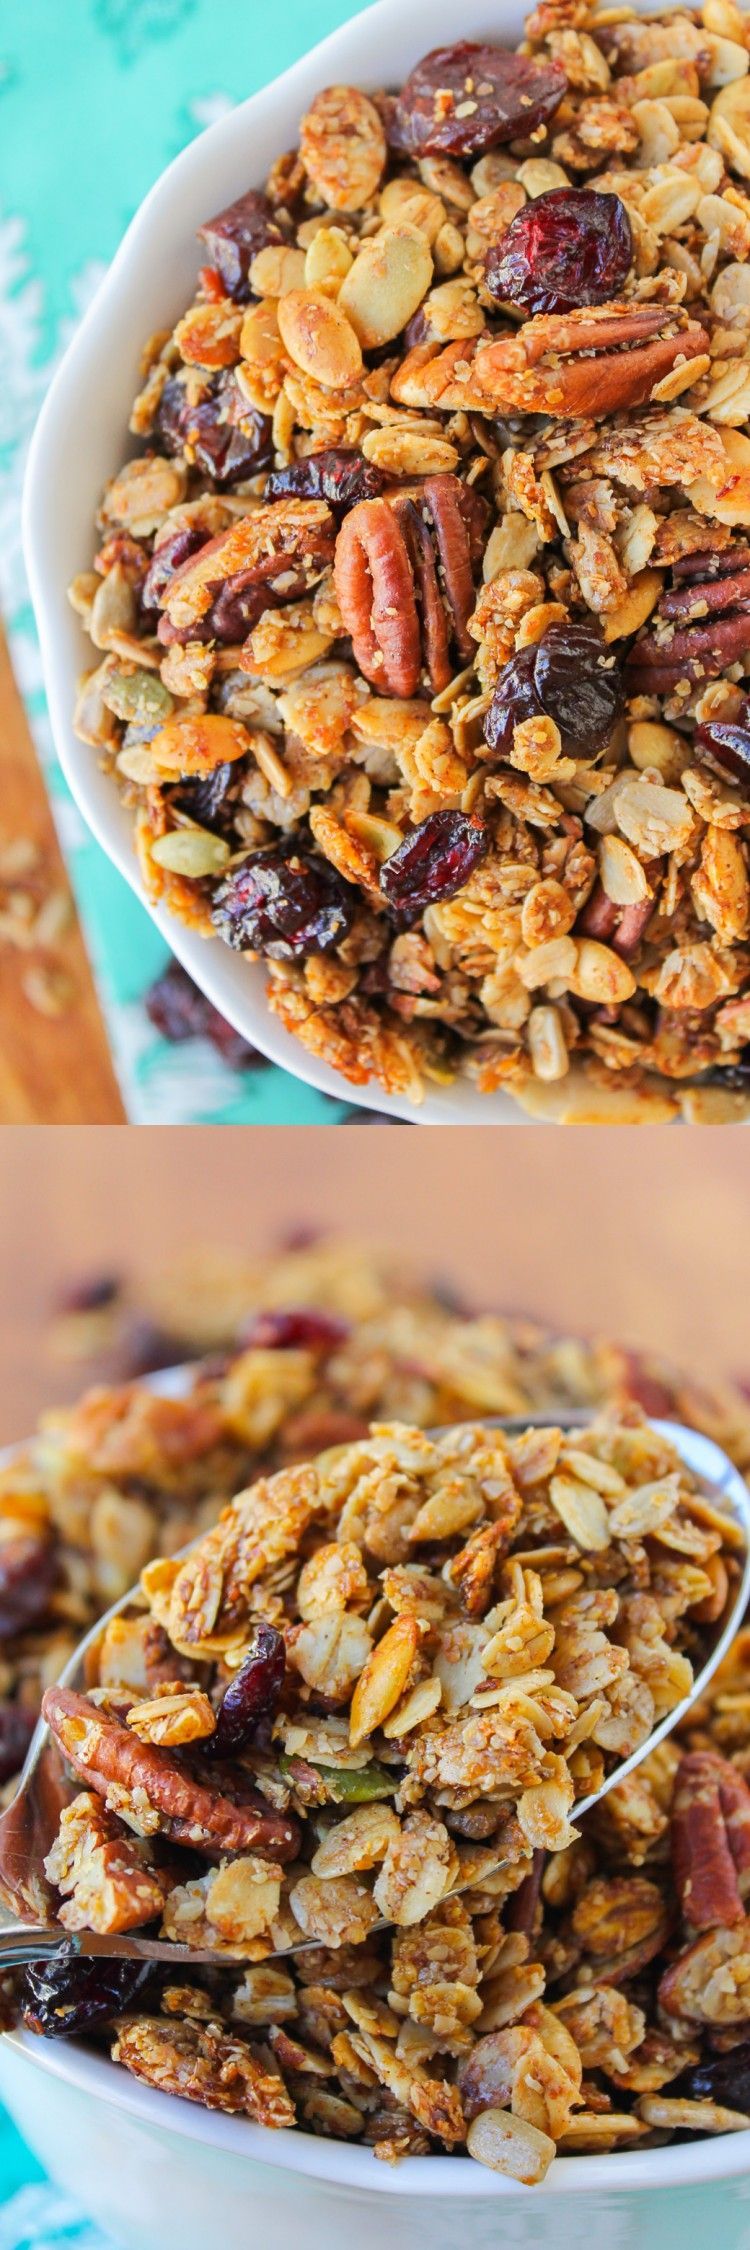 Maple Pecan Granola with Cherries – The Food Charlatan // This sweet granola is perfect for fall!